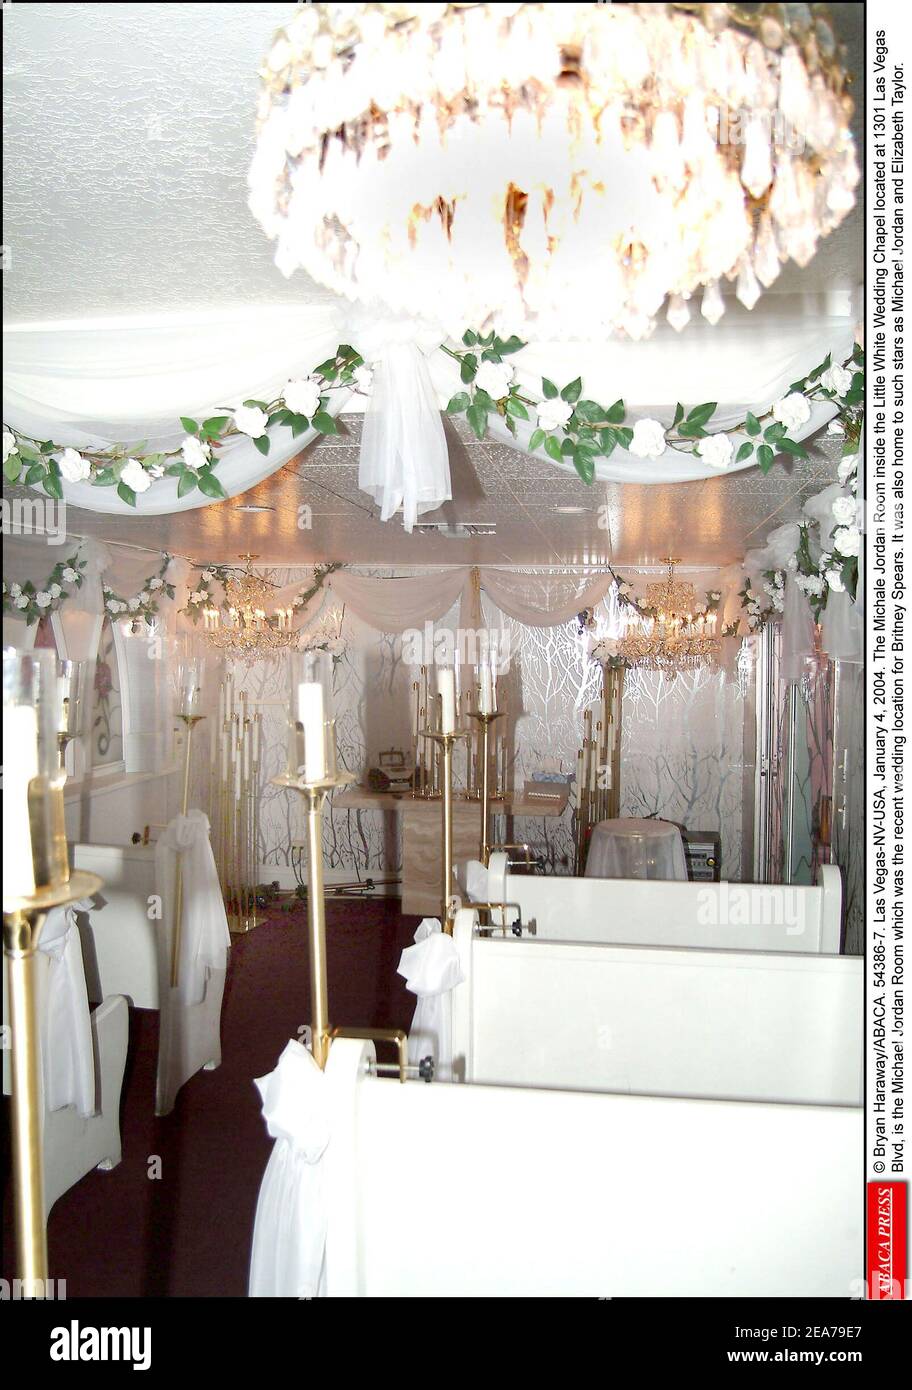 © Bryan Haraway/ABACA. 54386-7. Las Vegas-NV-USA, January 4, 2004. The Michale Jordan Room inside the Little White Wedding Chapel located at 1301 Las Vegas Blvd, is the Michael Jordan Room which was the recent wedding location for Britney Spears. It was also home to such stars as Michael Jordan and Elizabeth Taylor. Stock Photo